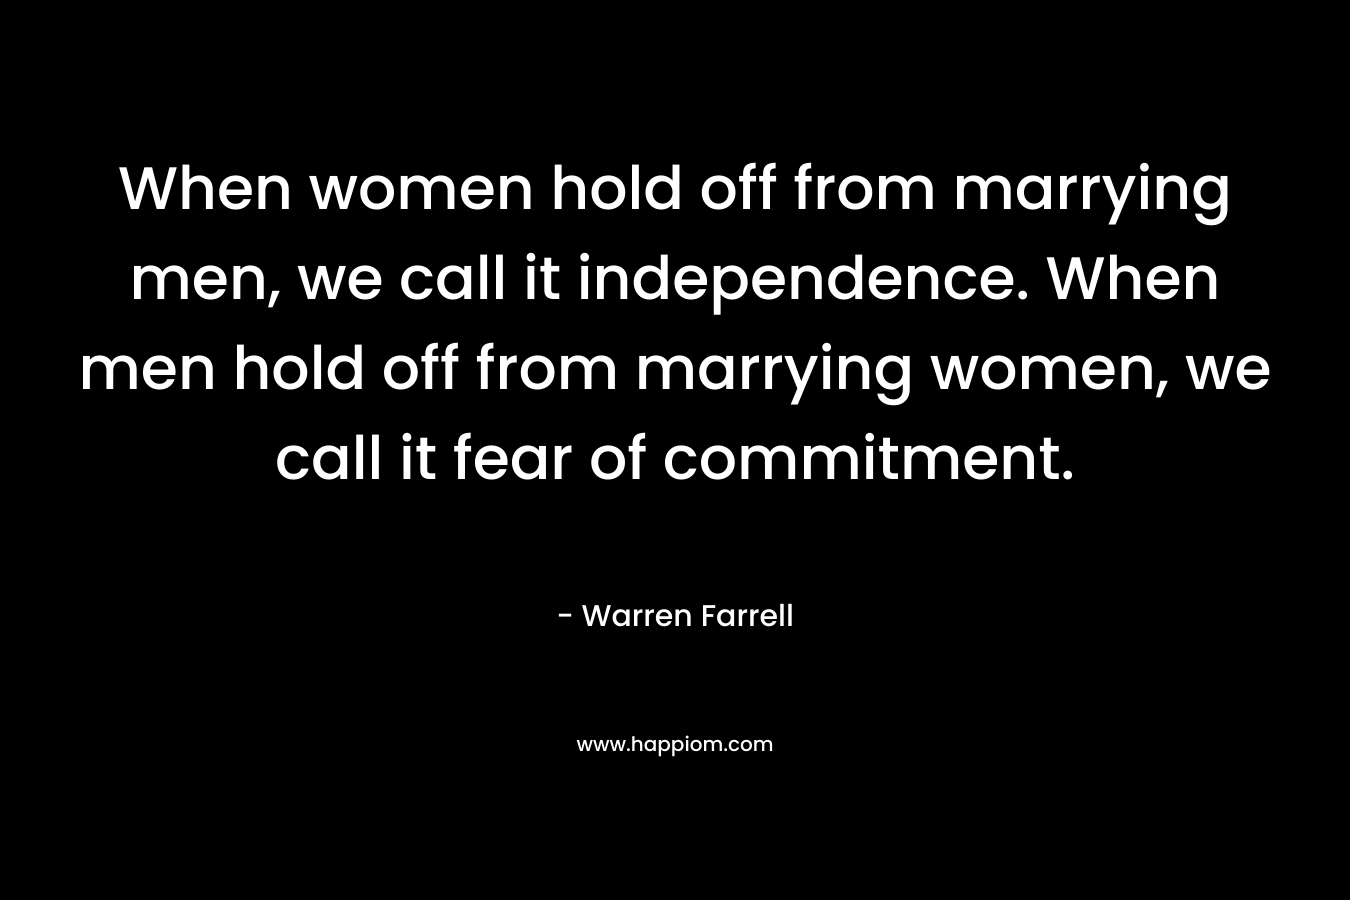 When women hold off from marrying men, we call it independence. When men hold off from marrying women, we call it fear of commitment.